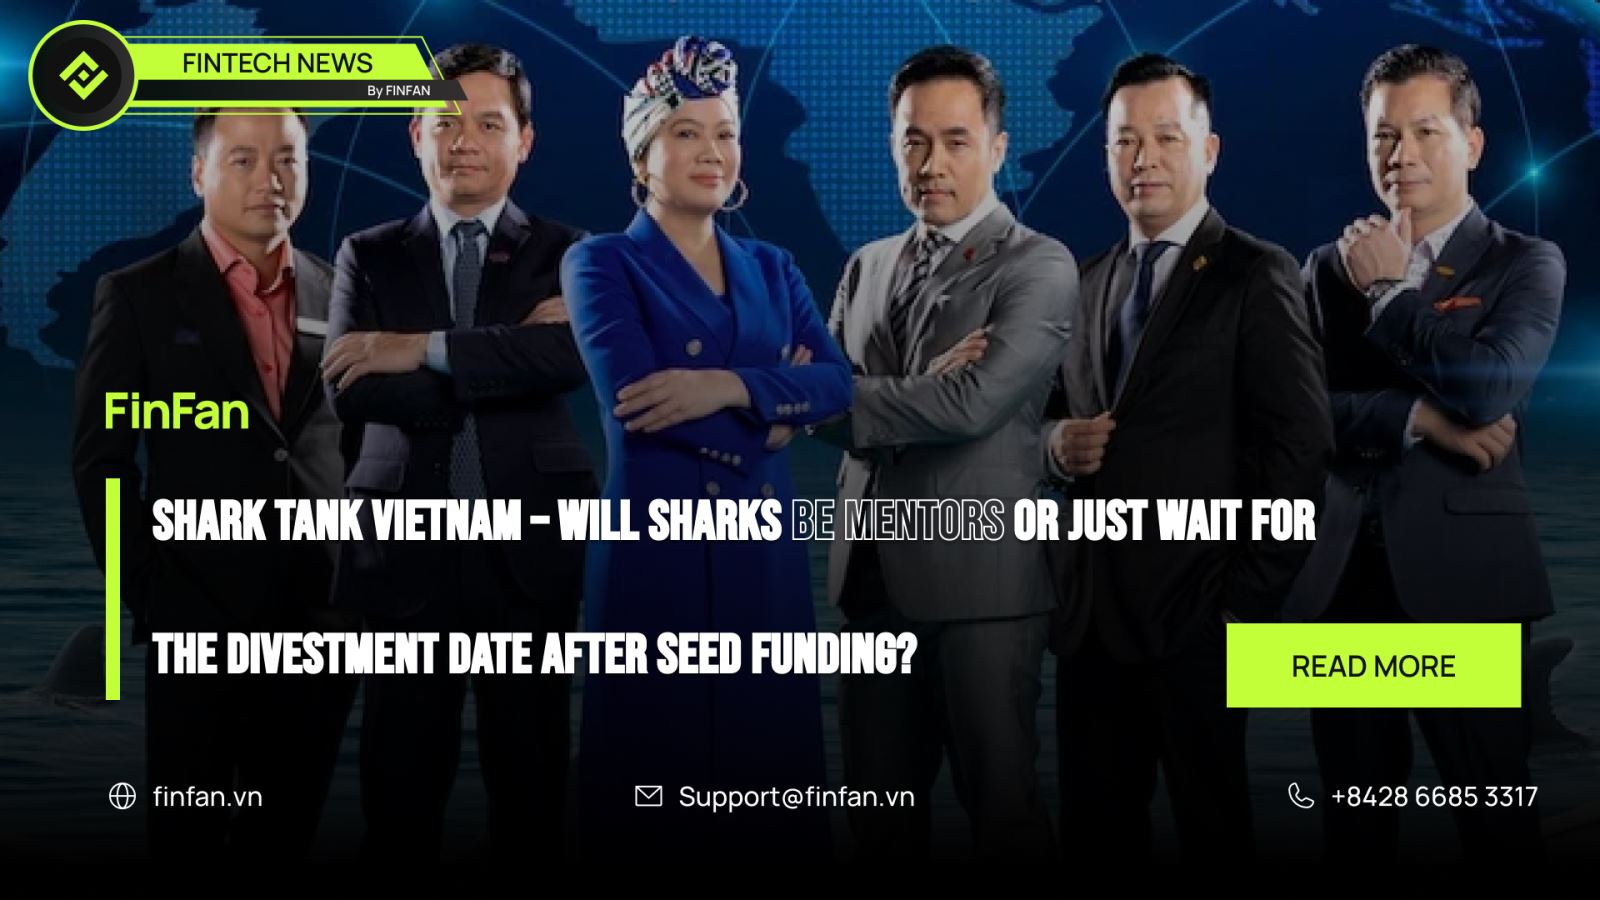 Shark Tank Vietnam – will sharks be mentors or just wait for the divestment date after seed funding?